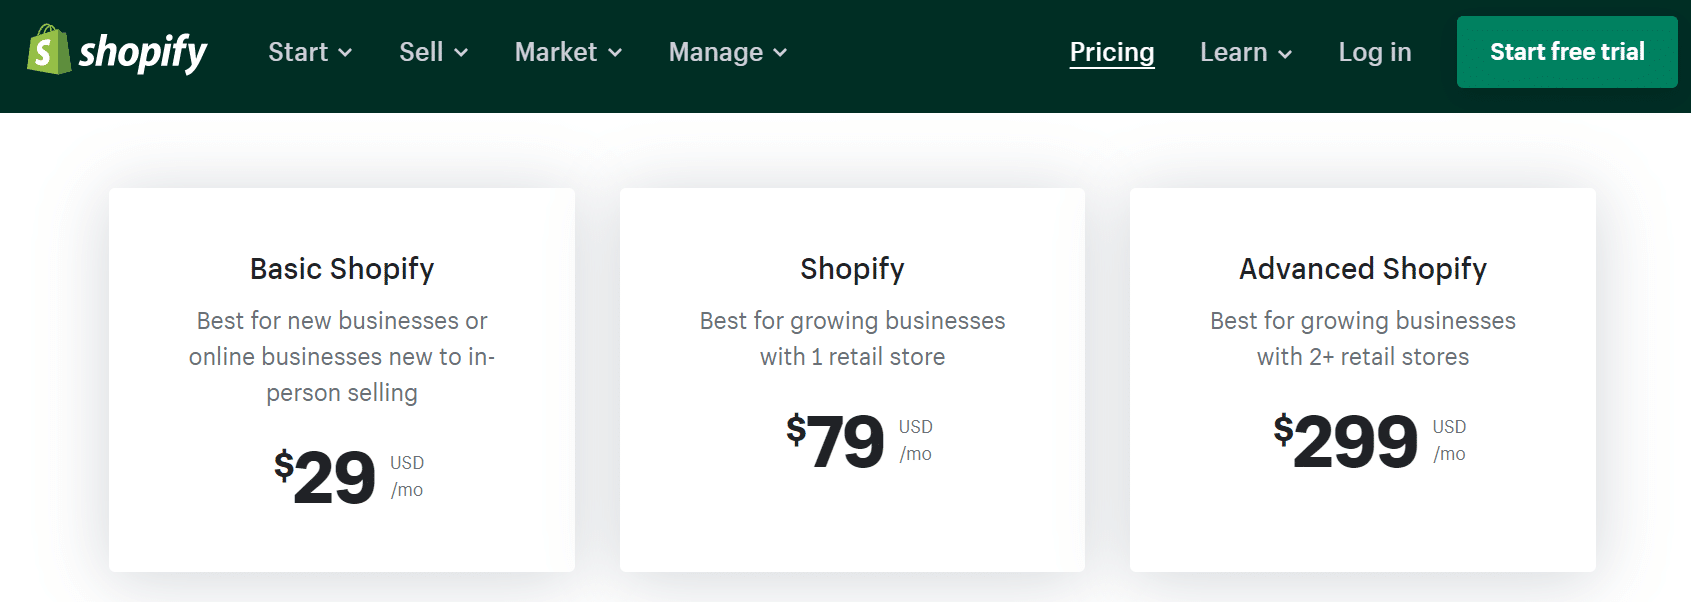 Shopify charm pricing